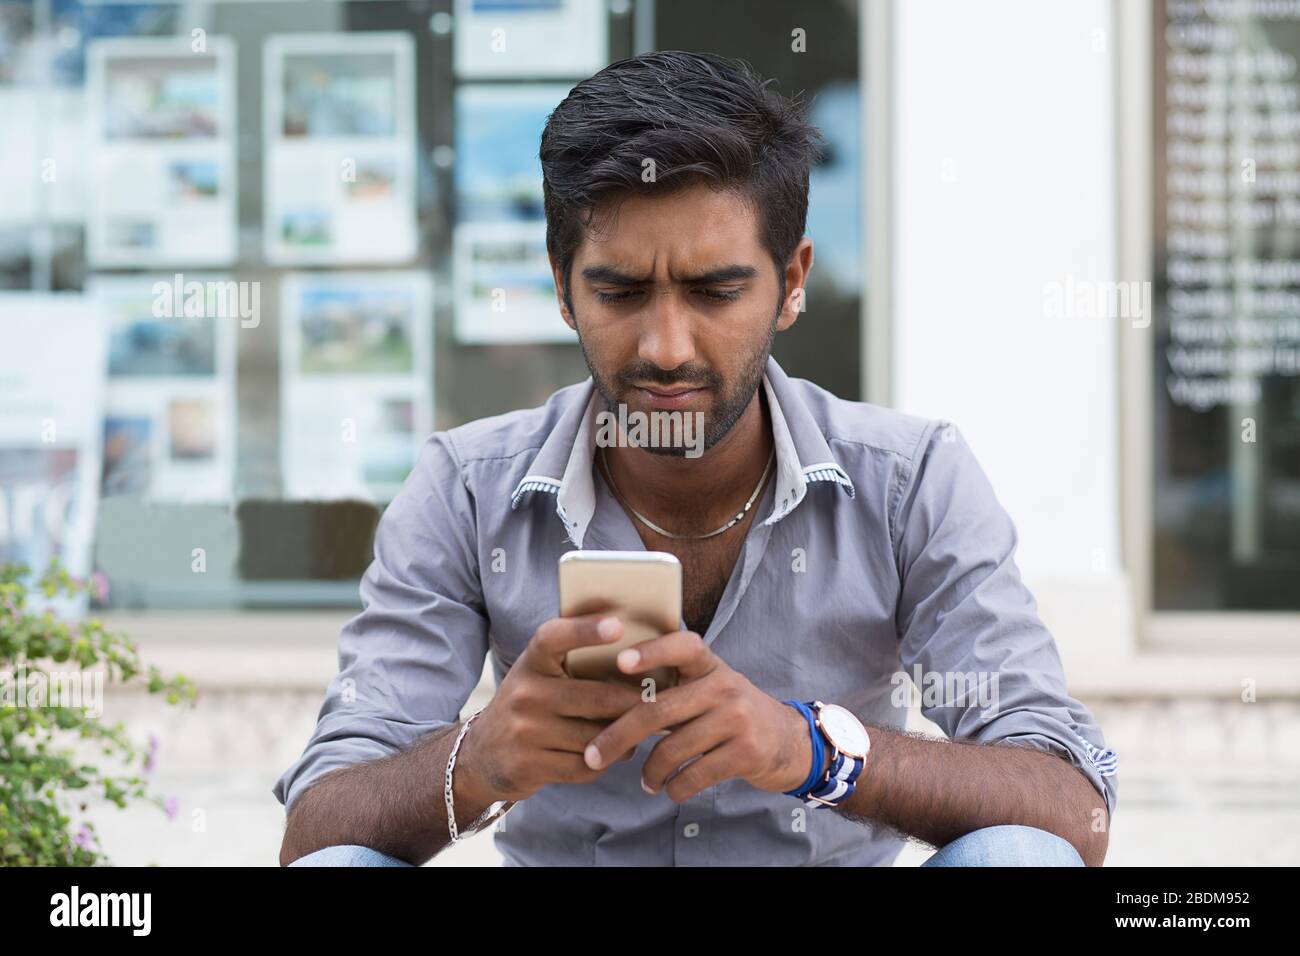 Man phone. Closeup portrait angry indian male holding texting looking at cellphone isolated outdoors background Stock Photo